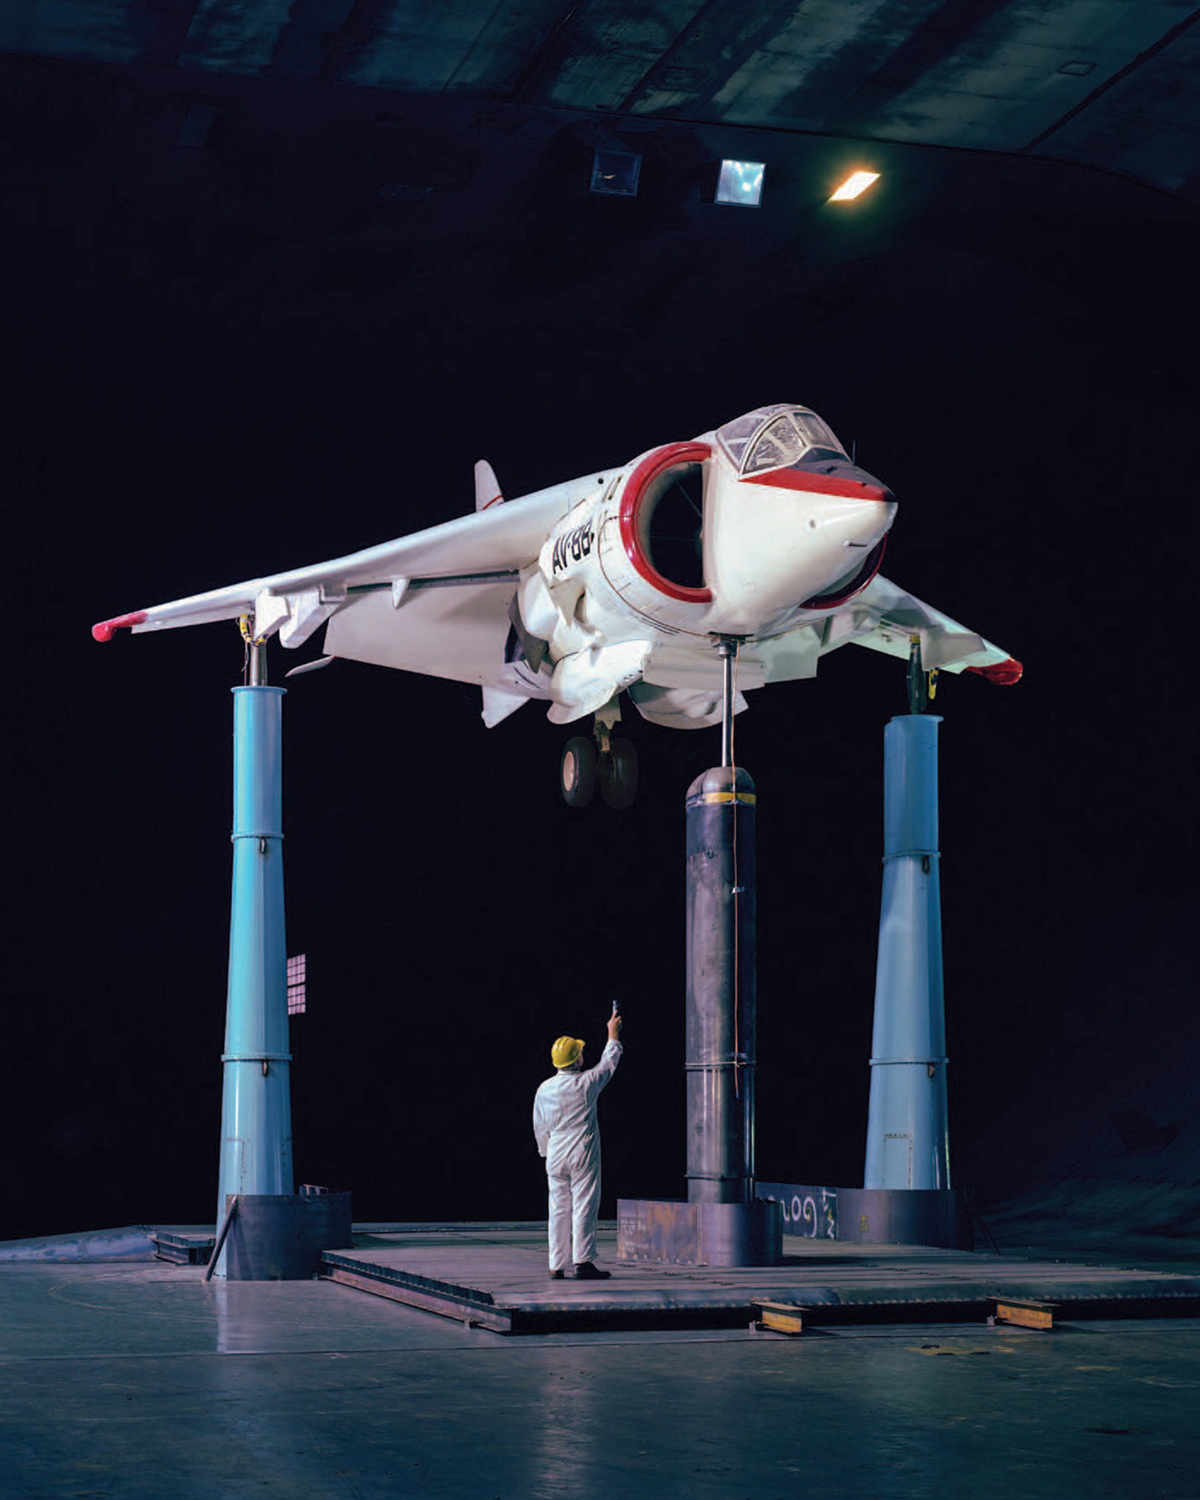 A man in a hard hat with his back to the camera points up at a white fighter jet, which is raised above the floor on tall columns inside a wind tunnel.